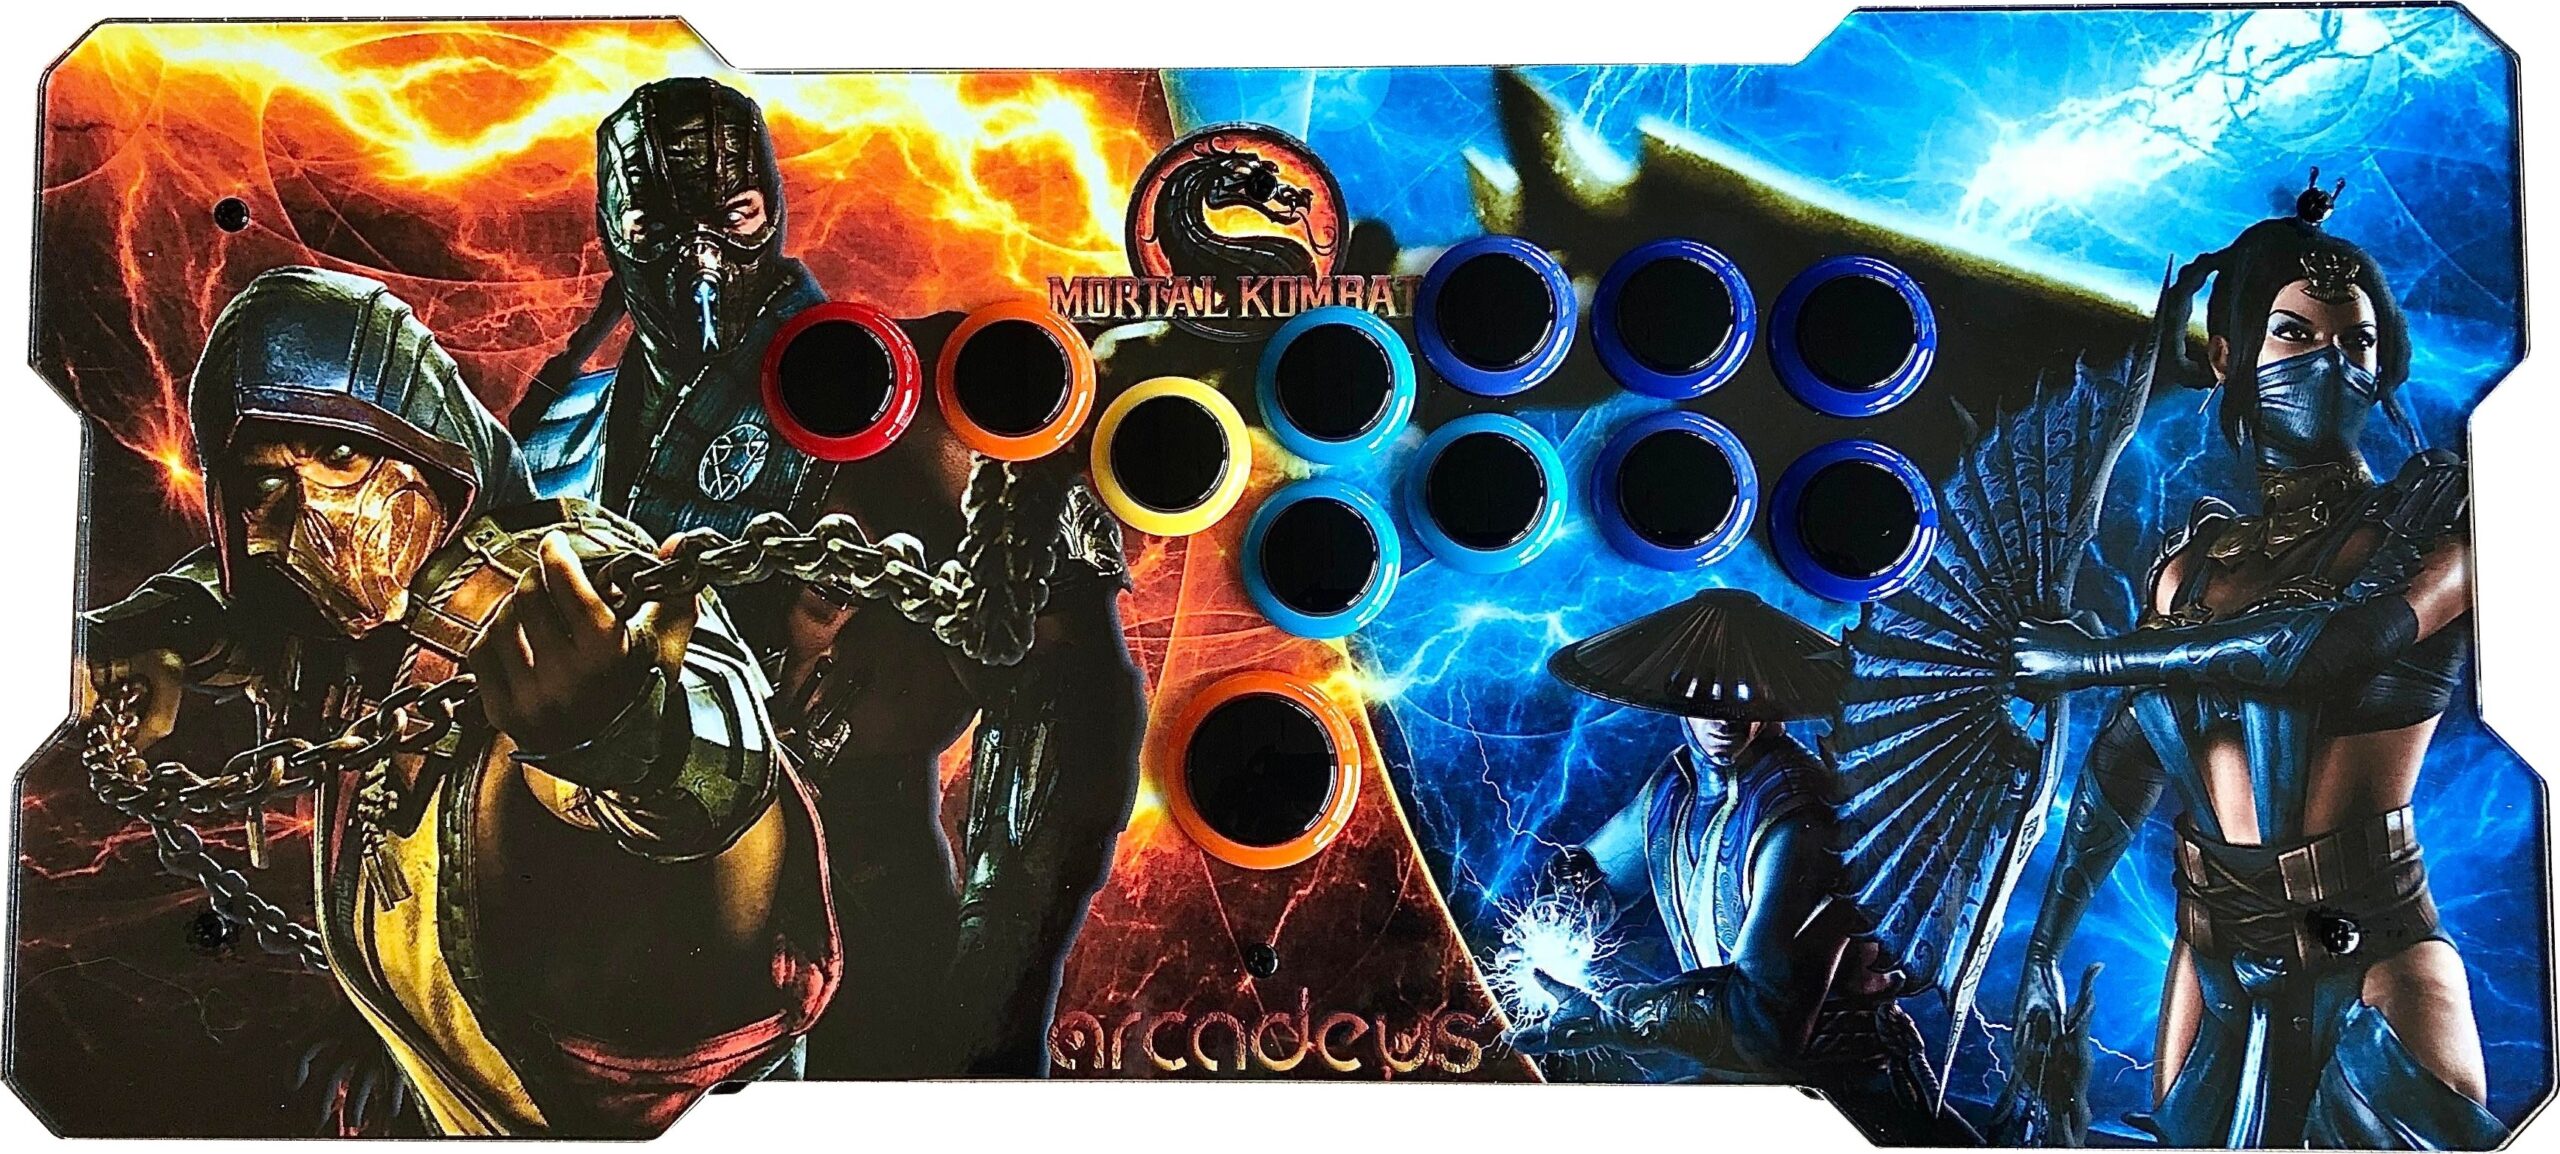 Read more about the article Arcadeus Arcade & Stick Overview